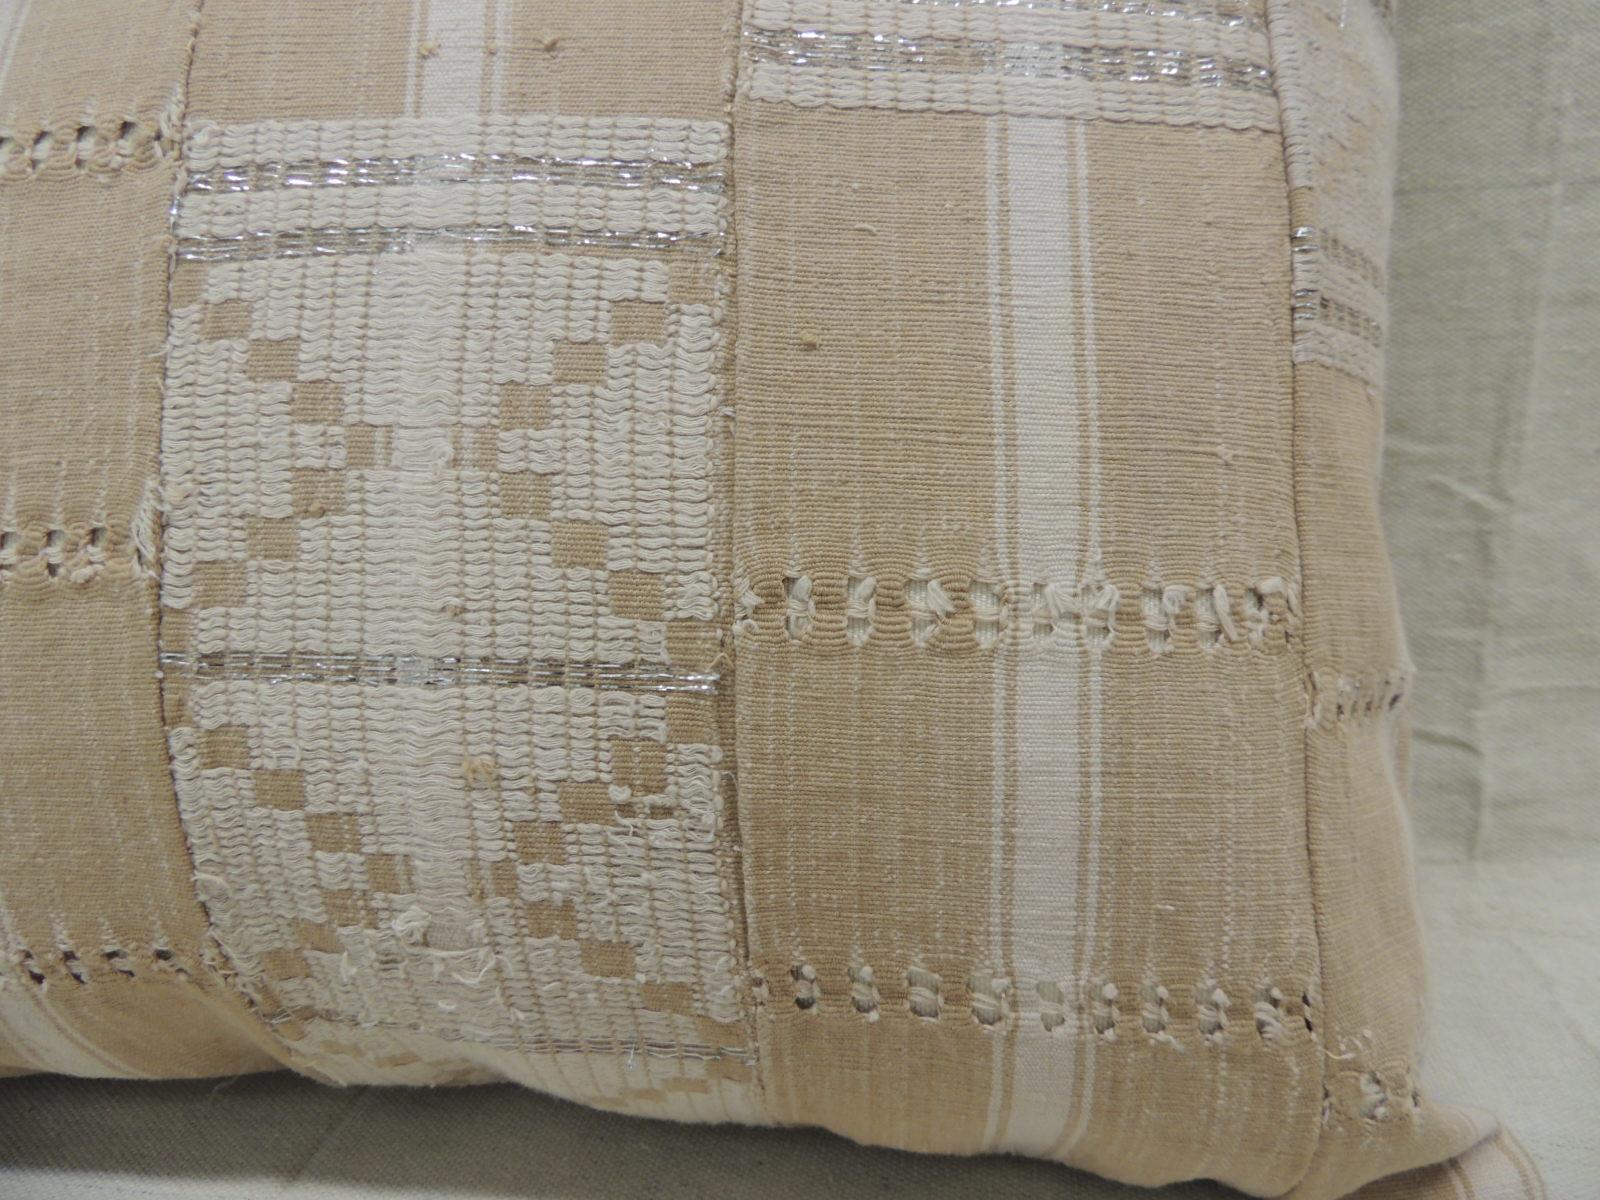 Hand-Crafted Vintage Tan and White Woven Ewe Stripweaves African Bolster Decorative Pillow